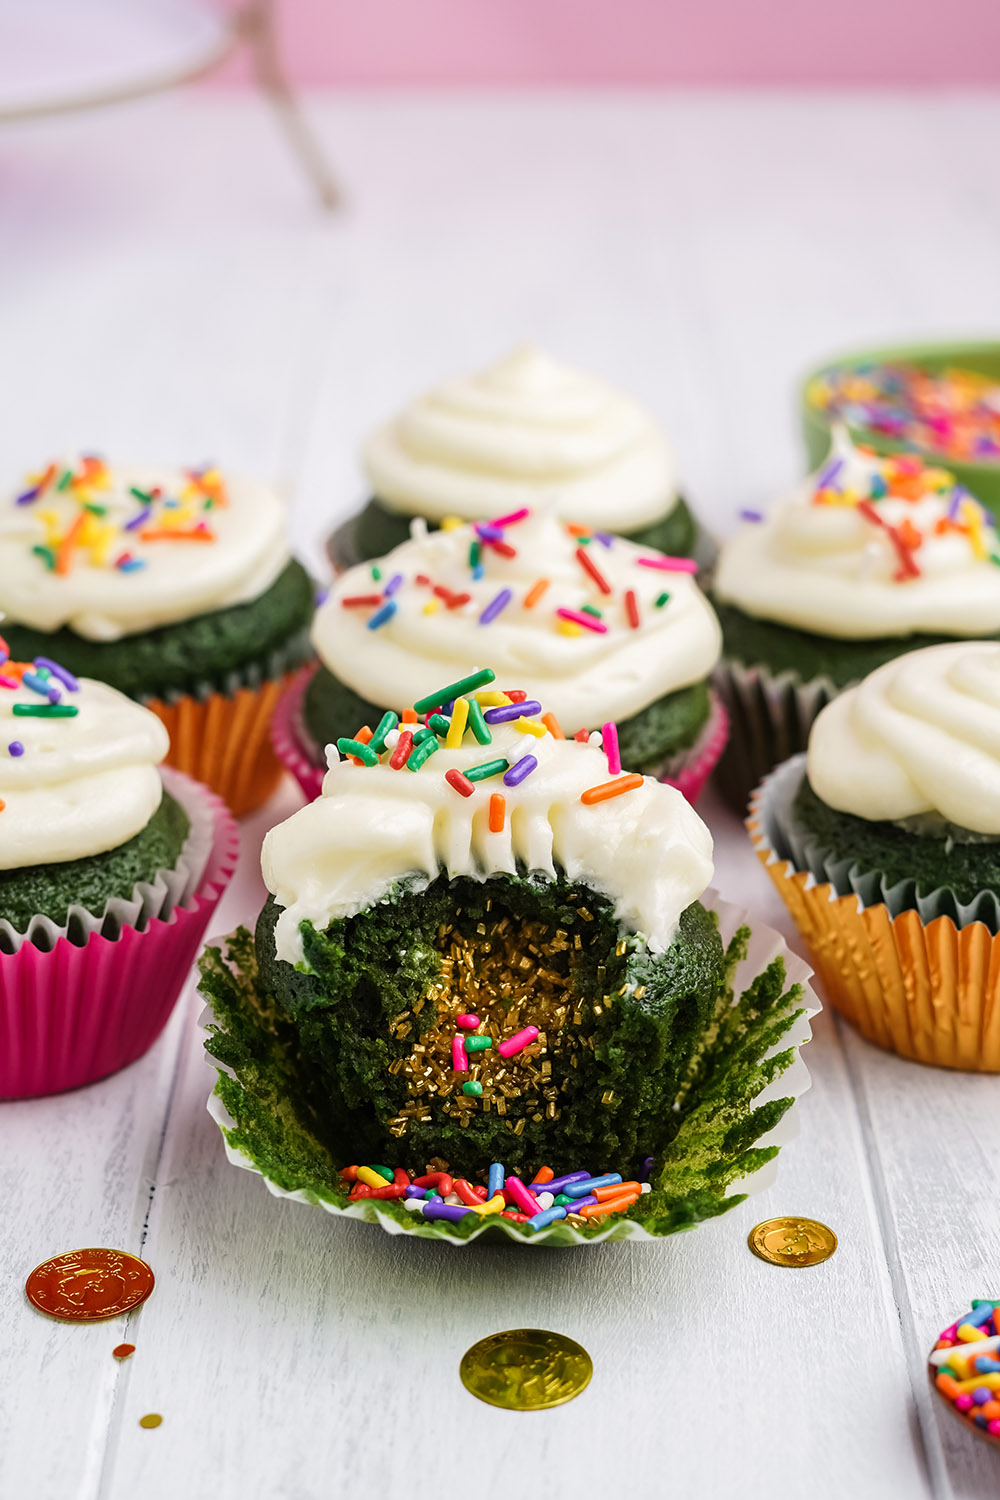 Green cupcakes with white frosting and sprinkles as a surprise filling.